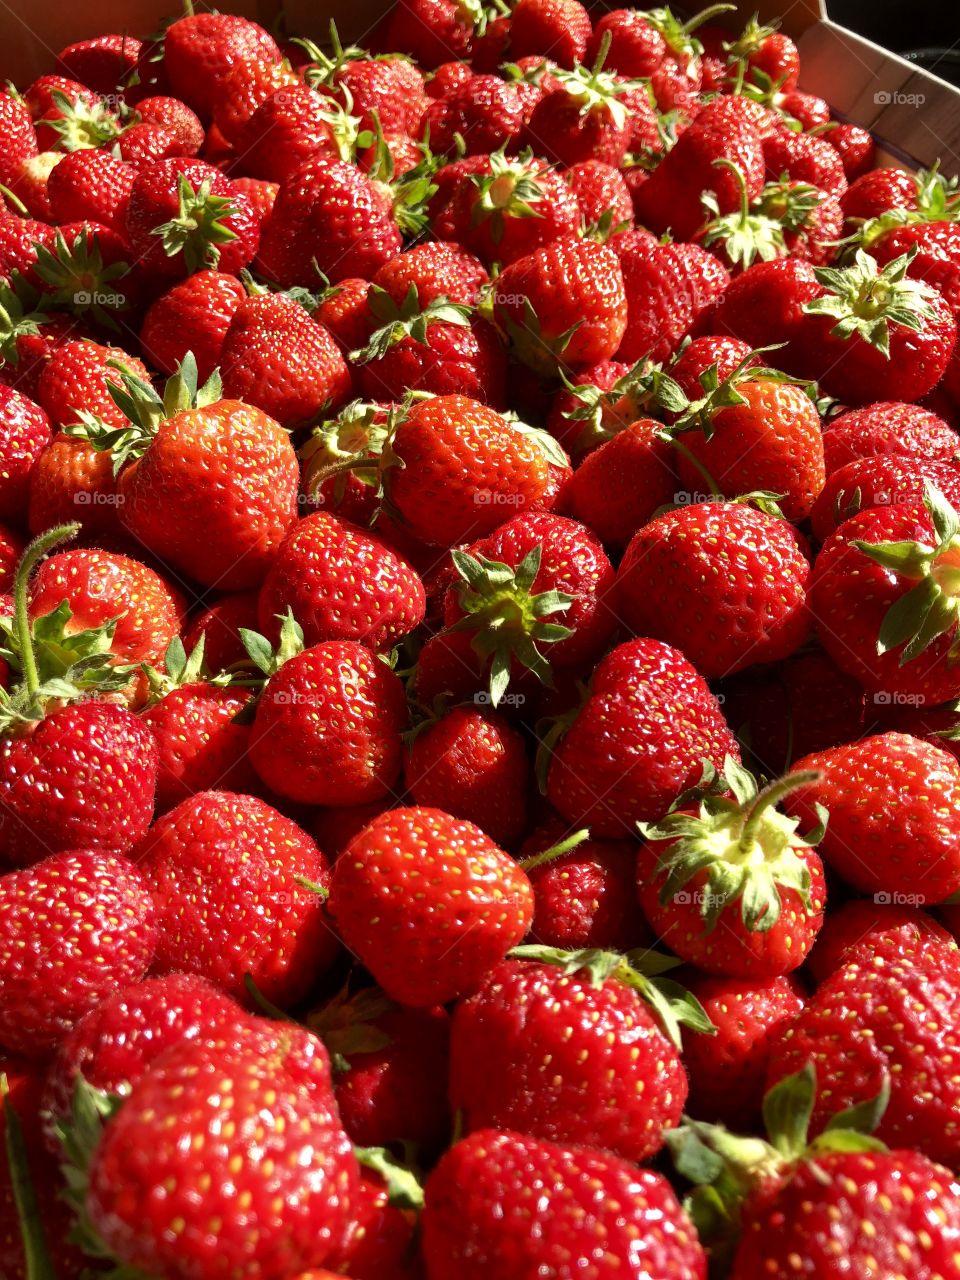 June is the peak month for Swedish strawberries 🍓